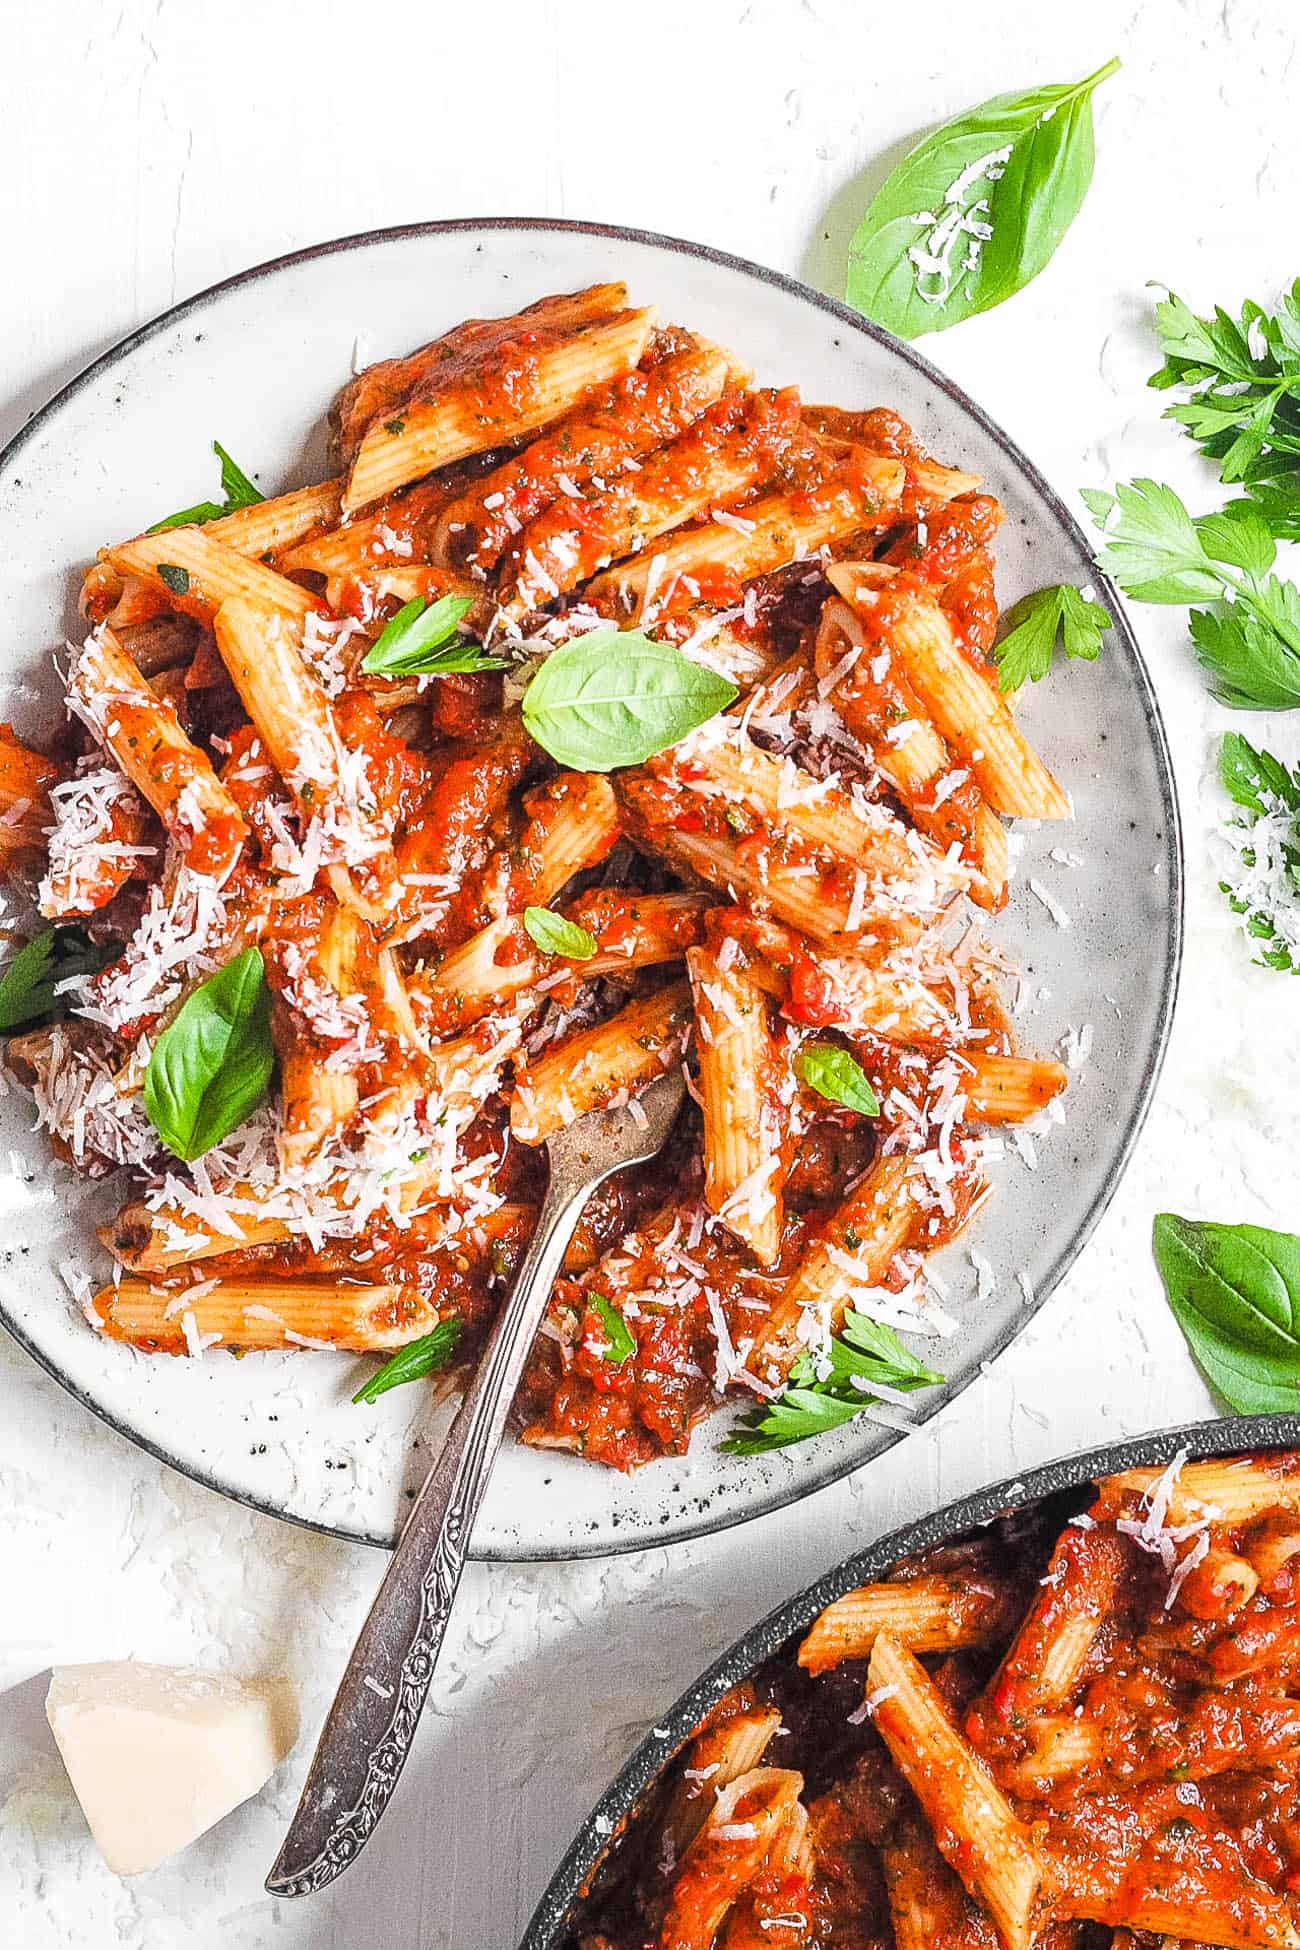 Red Lentil Pasta With Superfood Tomato Sauce